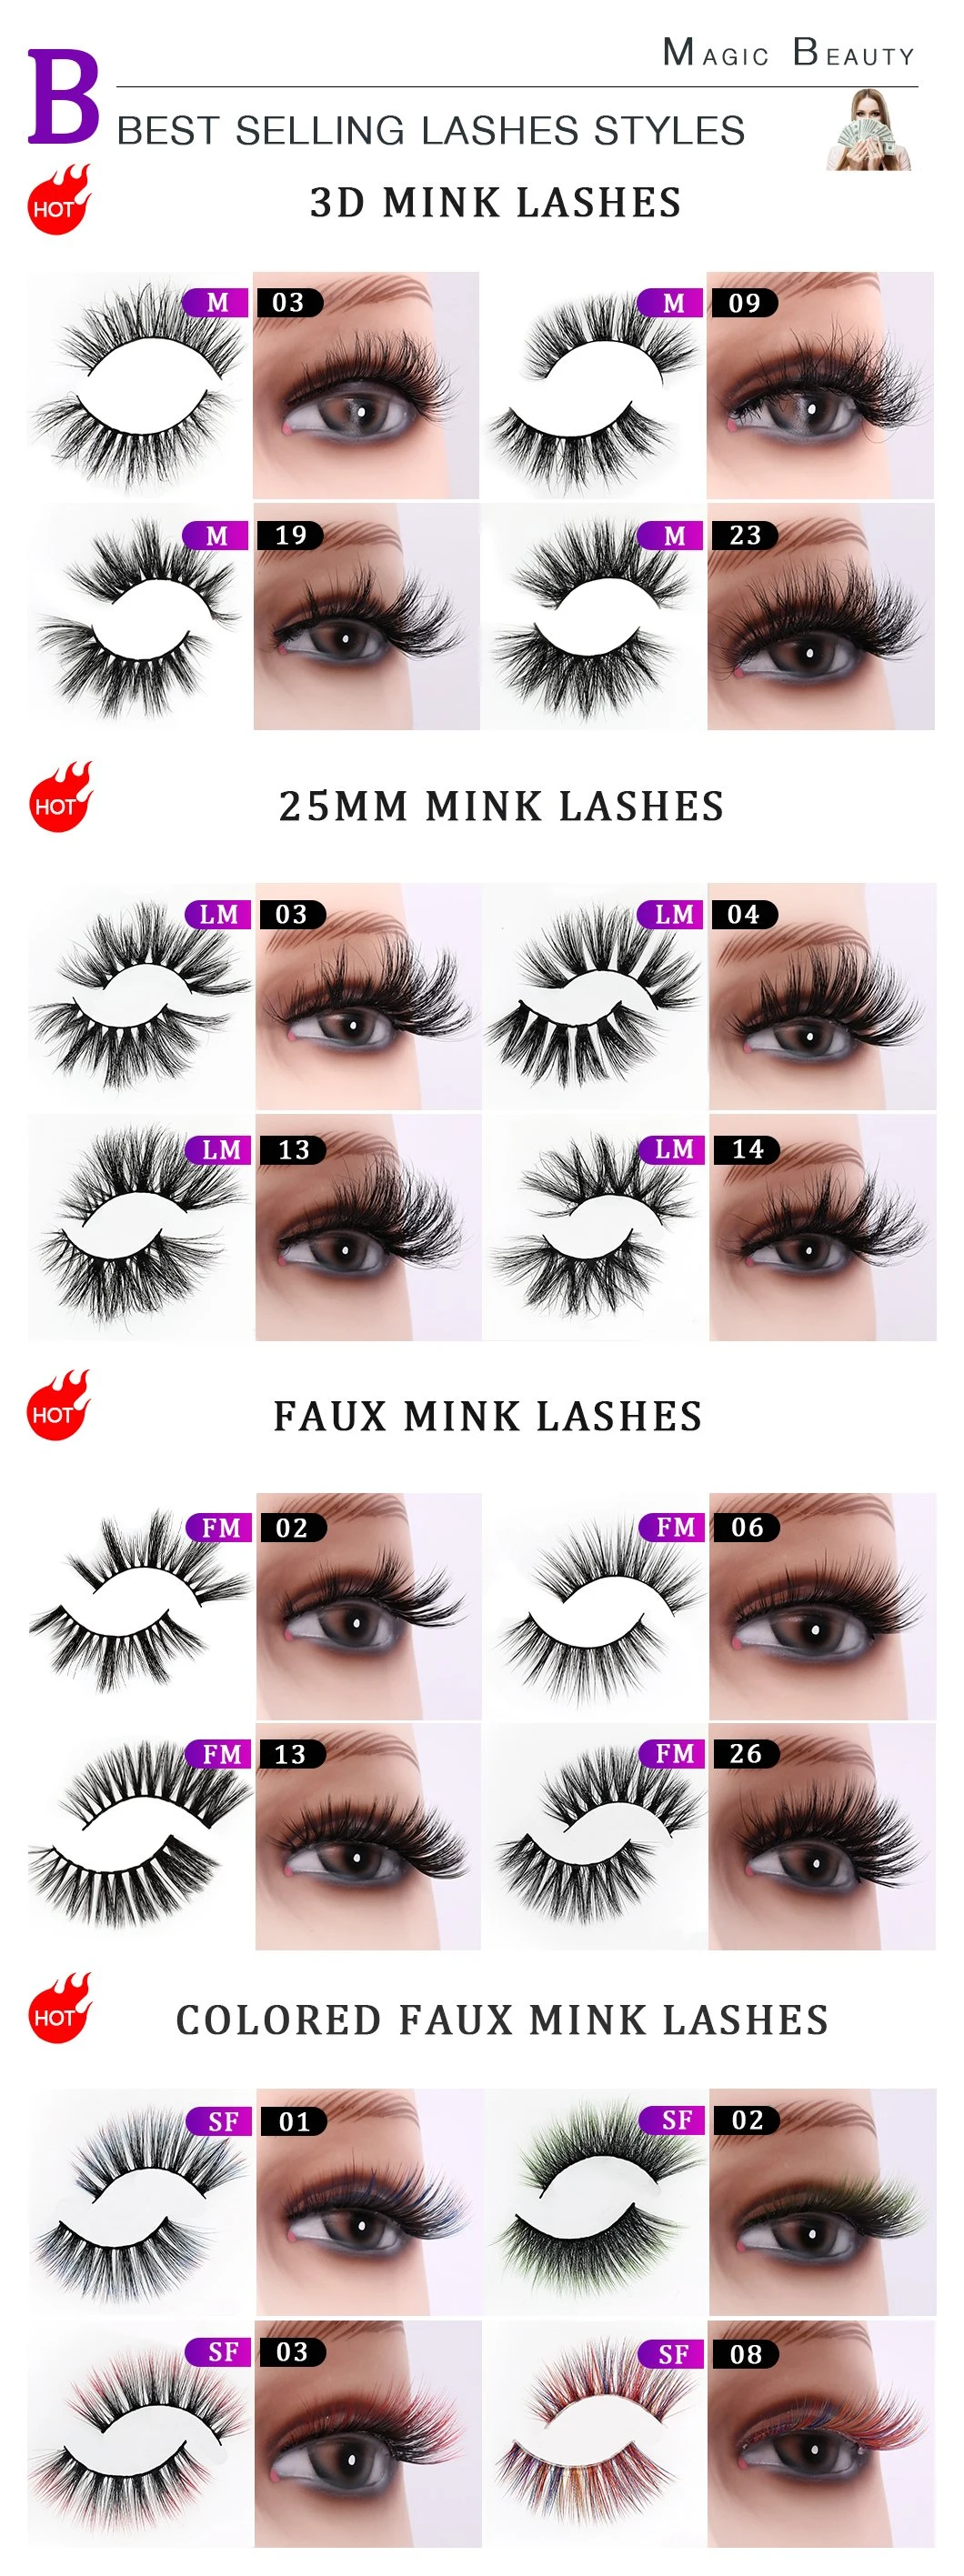 Own Brand Synthetic Strip Lashes 3D S07 S08 Silk Eyelashes Private Label Eyelash with Free Sample